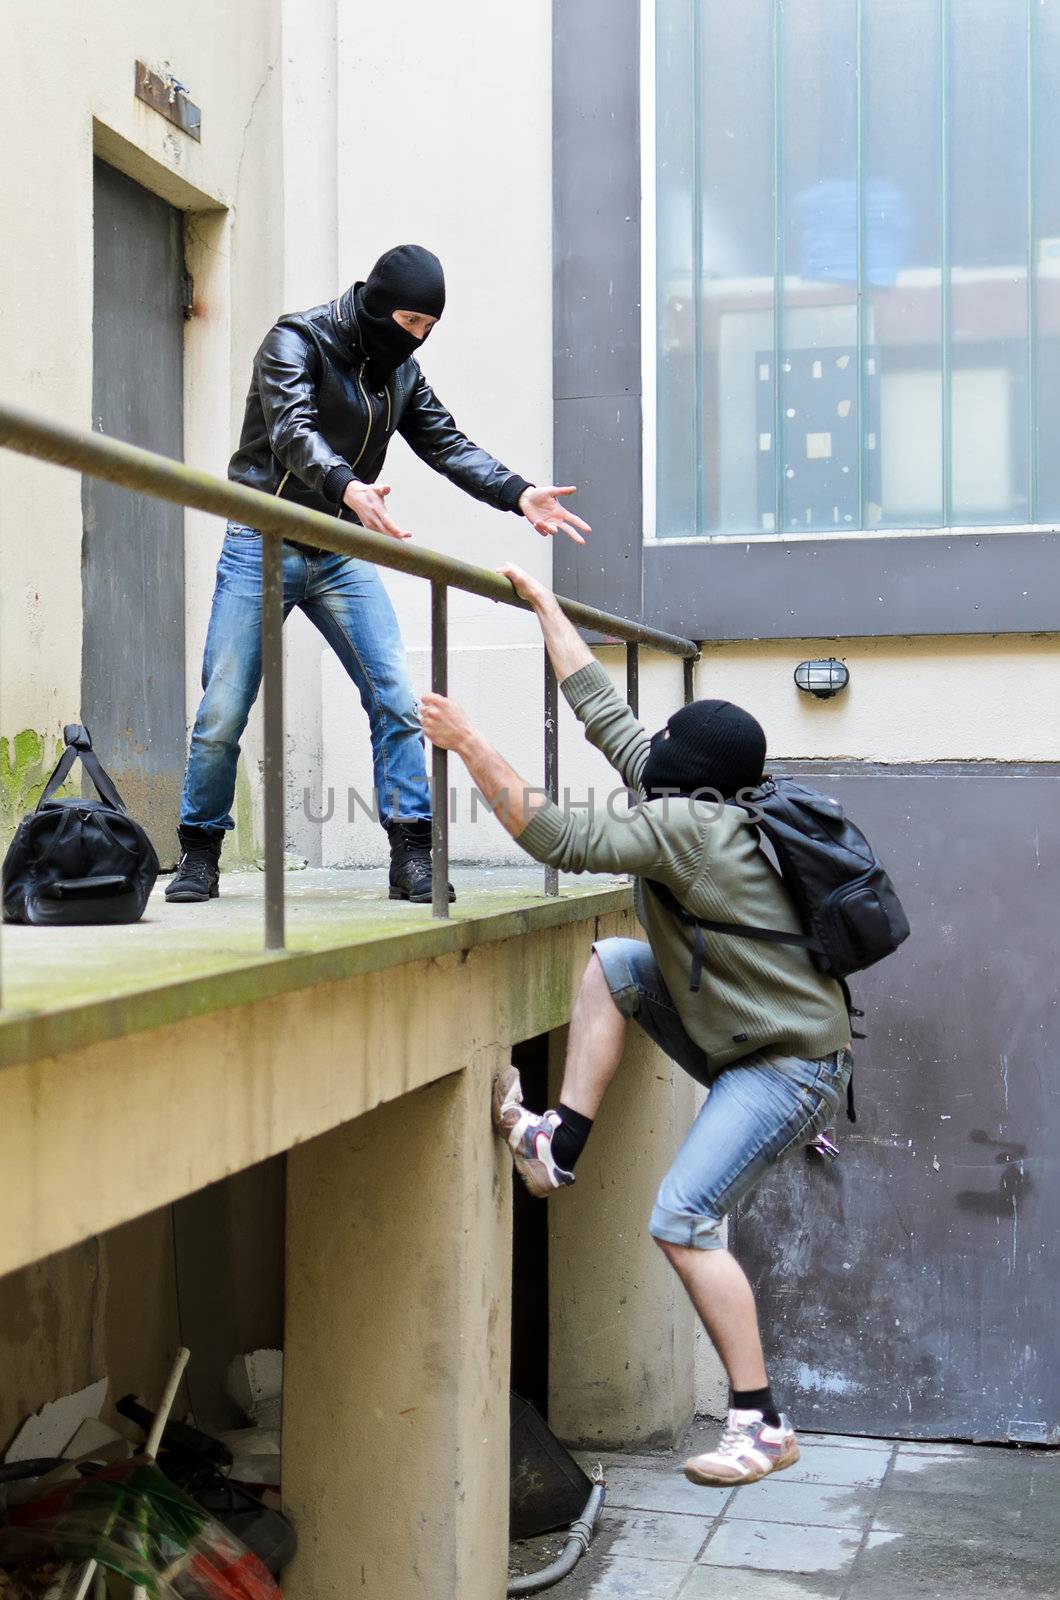 Escape from a robbery. One tries to help another to climb the rails.